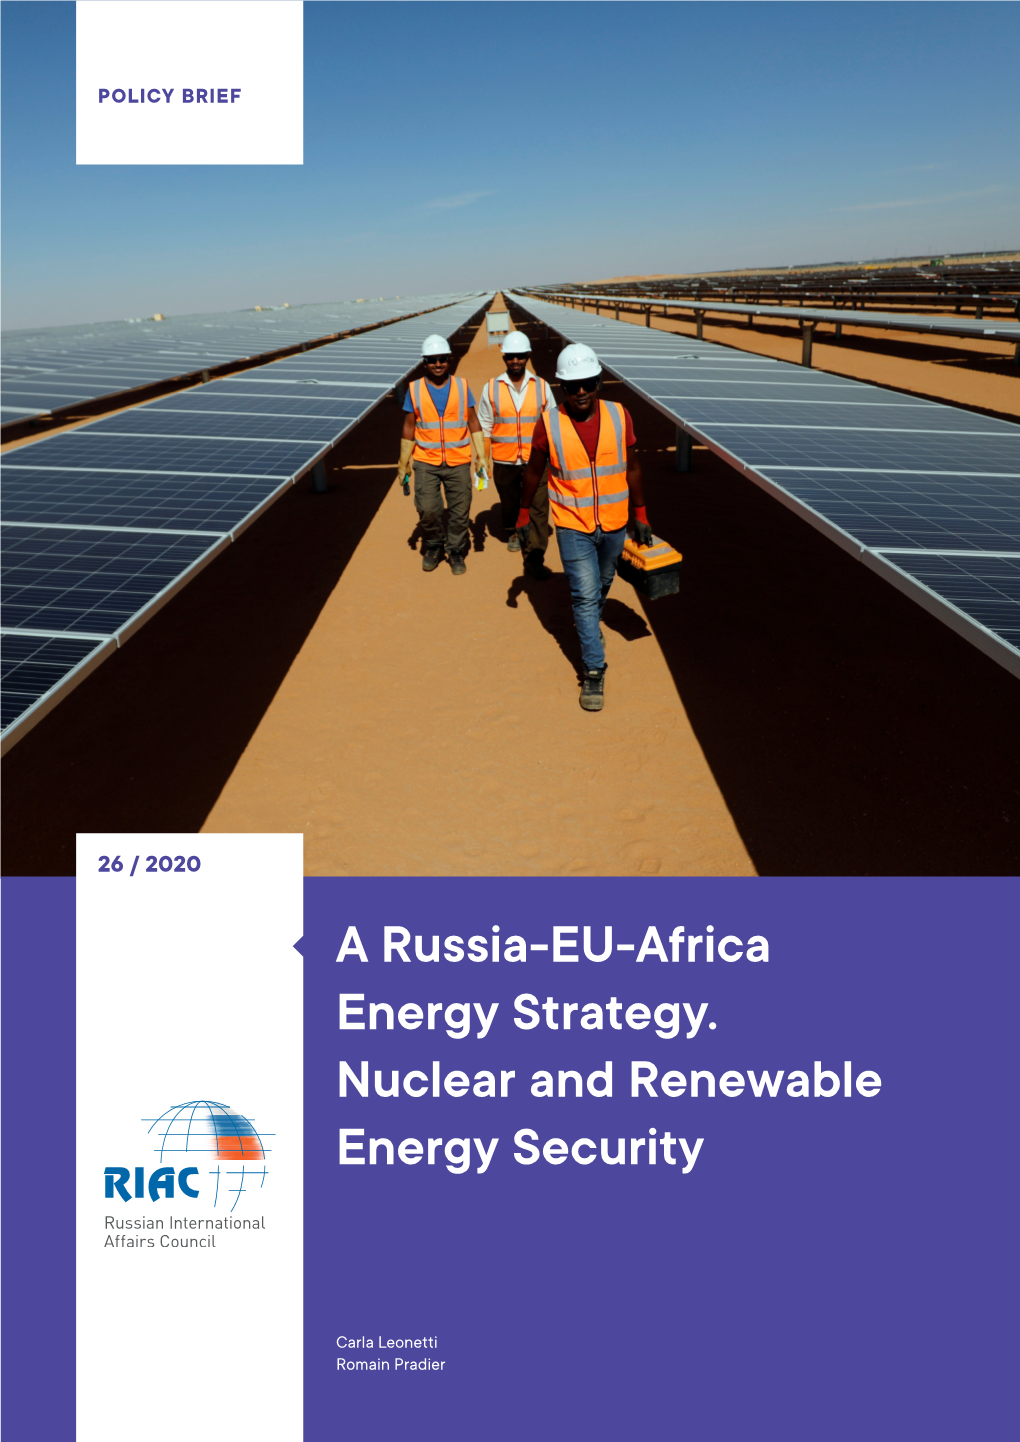 A Russia-EU-Africa Energy Strategy. Nuclear and Renewable Energy Security